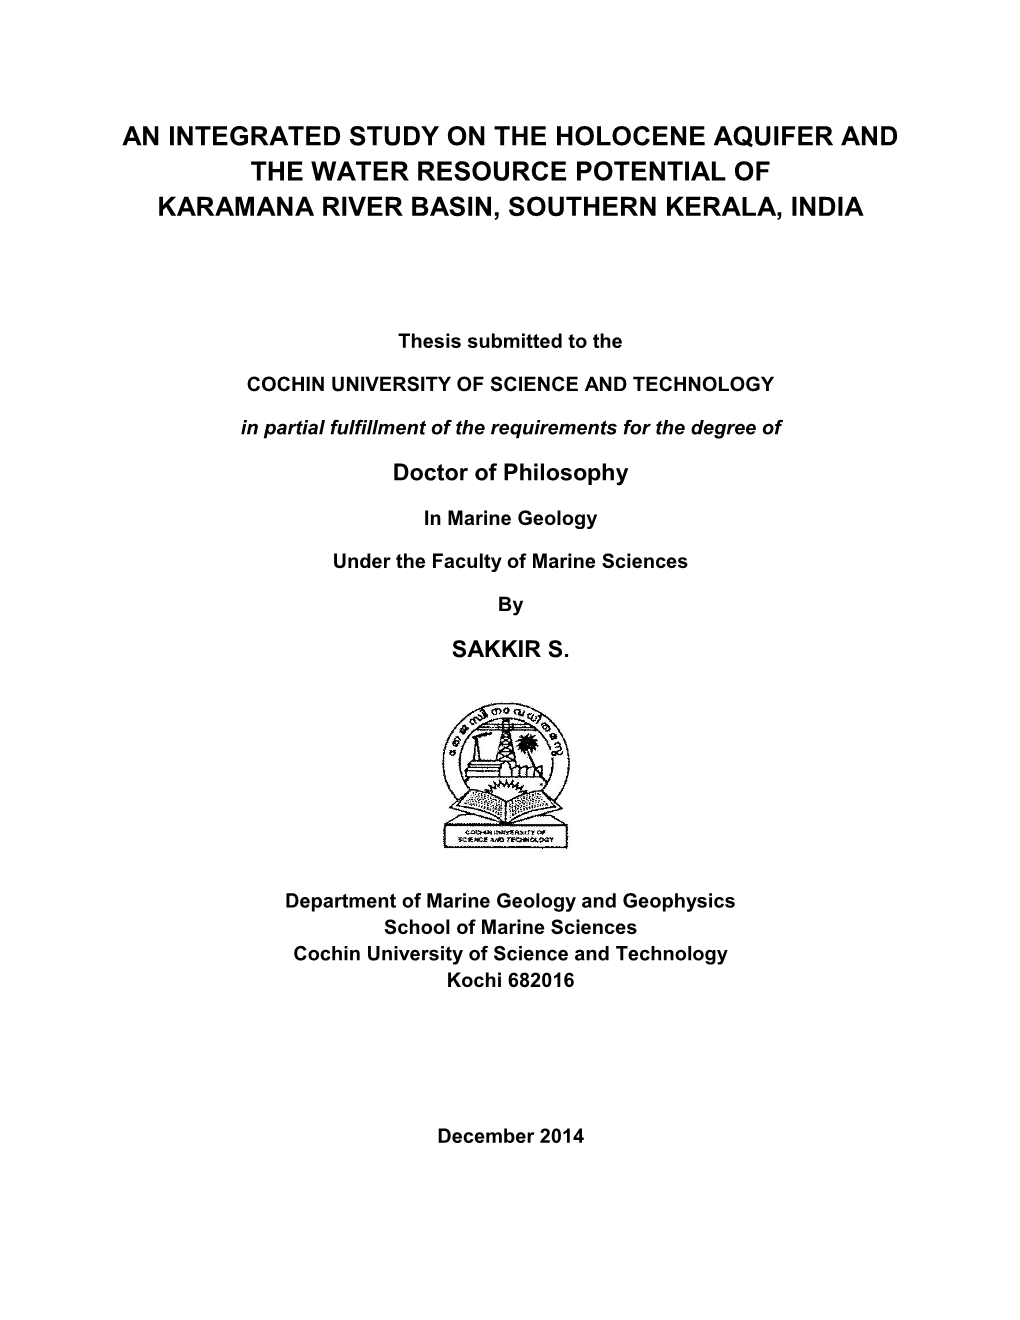 An Integrated Study on the Holocene Aquifer and the Water Resource Potential of Karamana River Basin, Southern Kerala, India